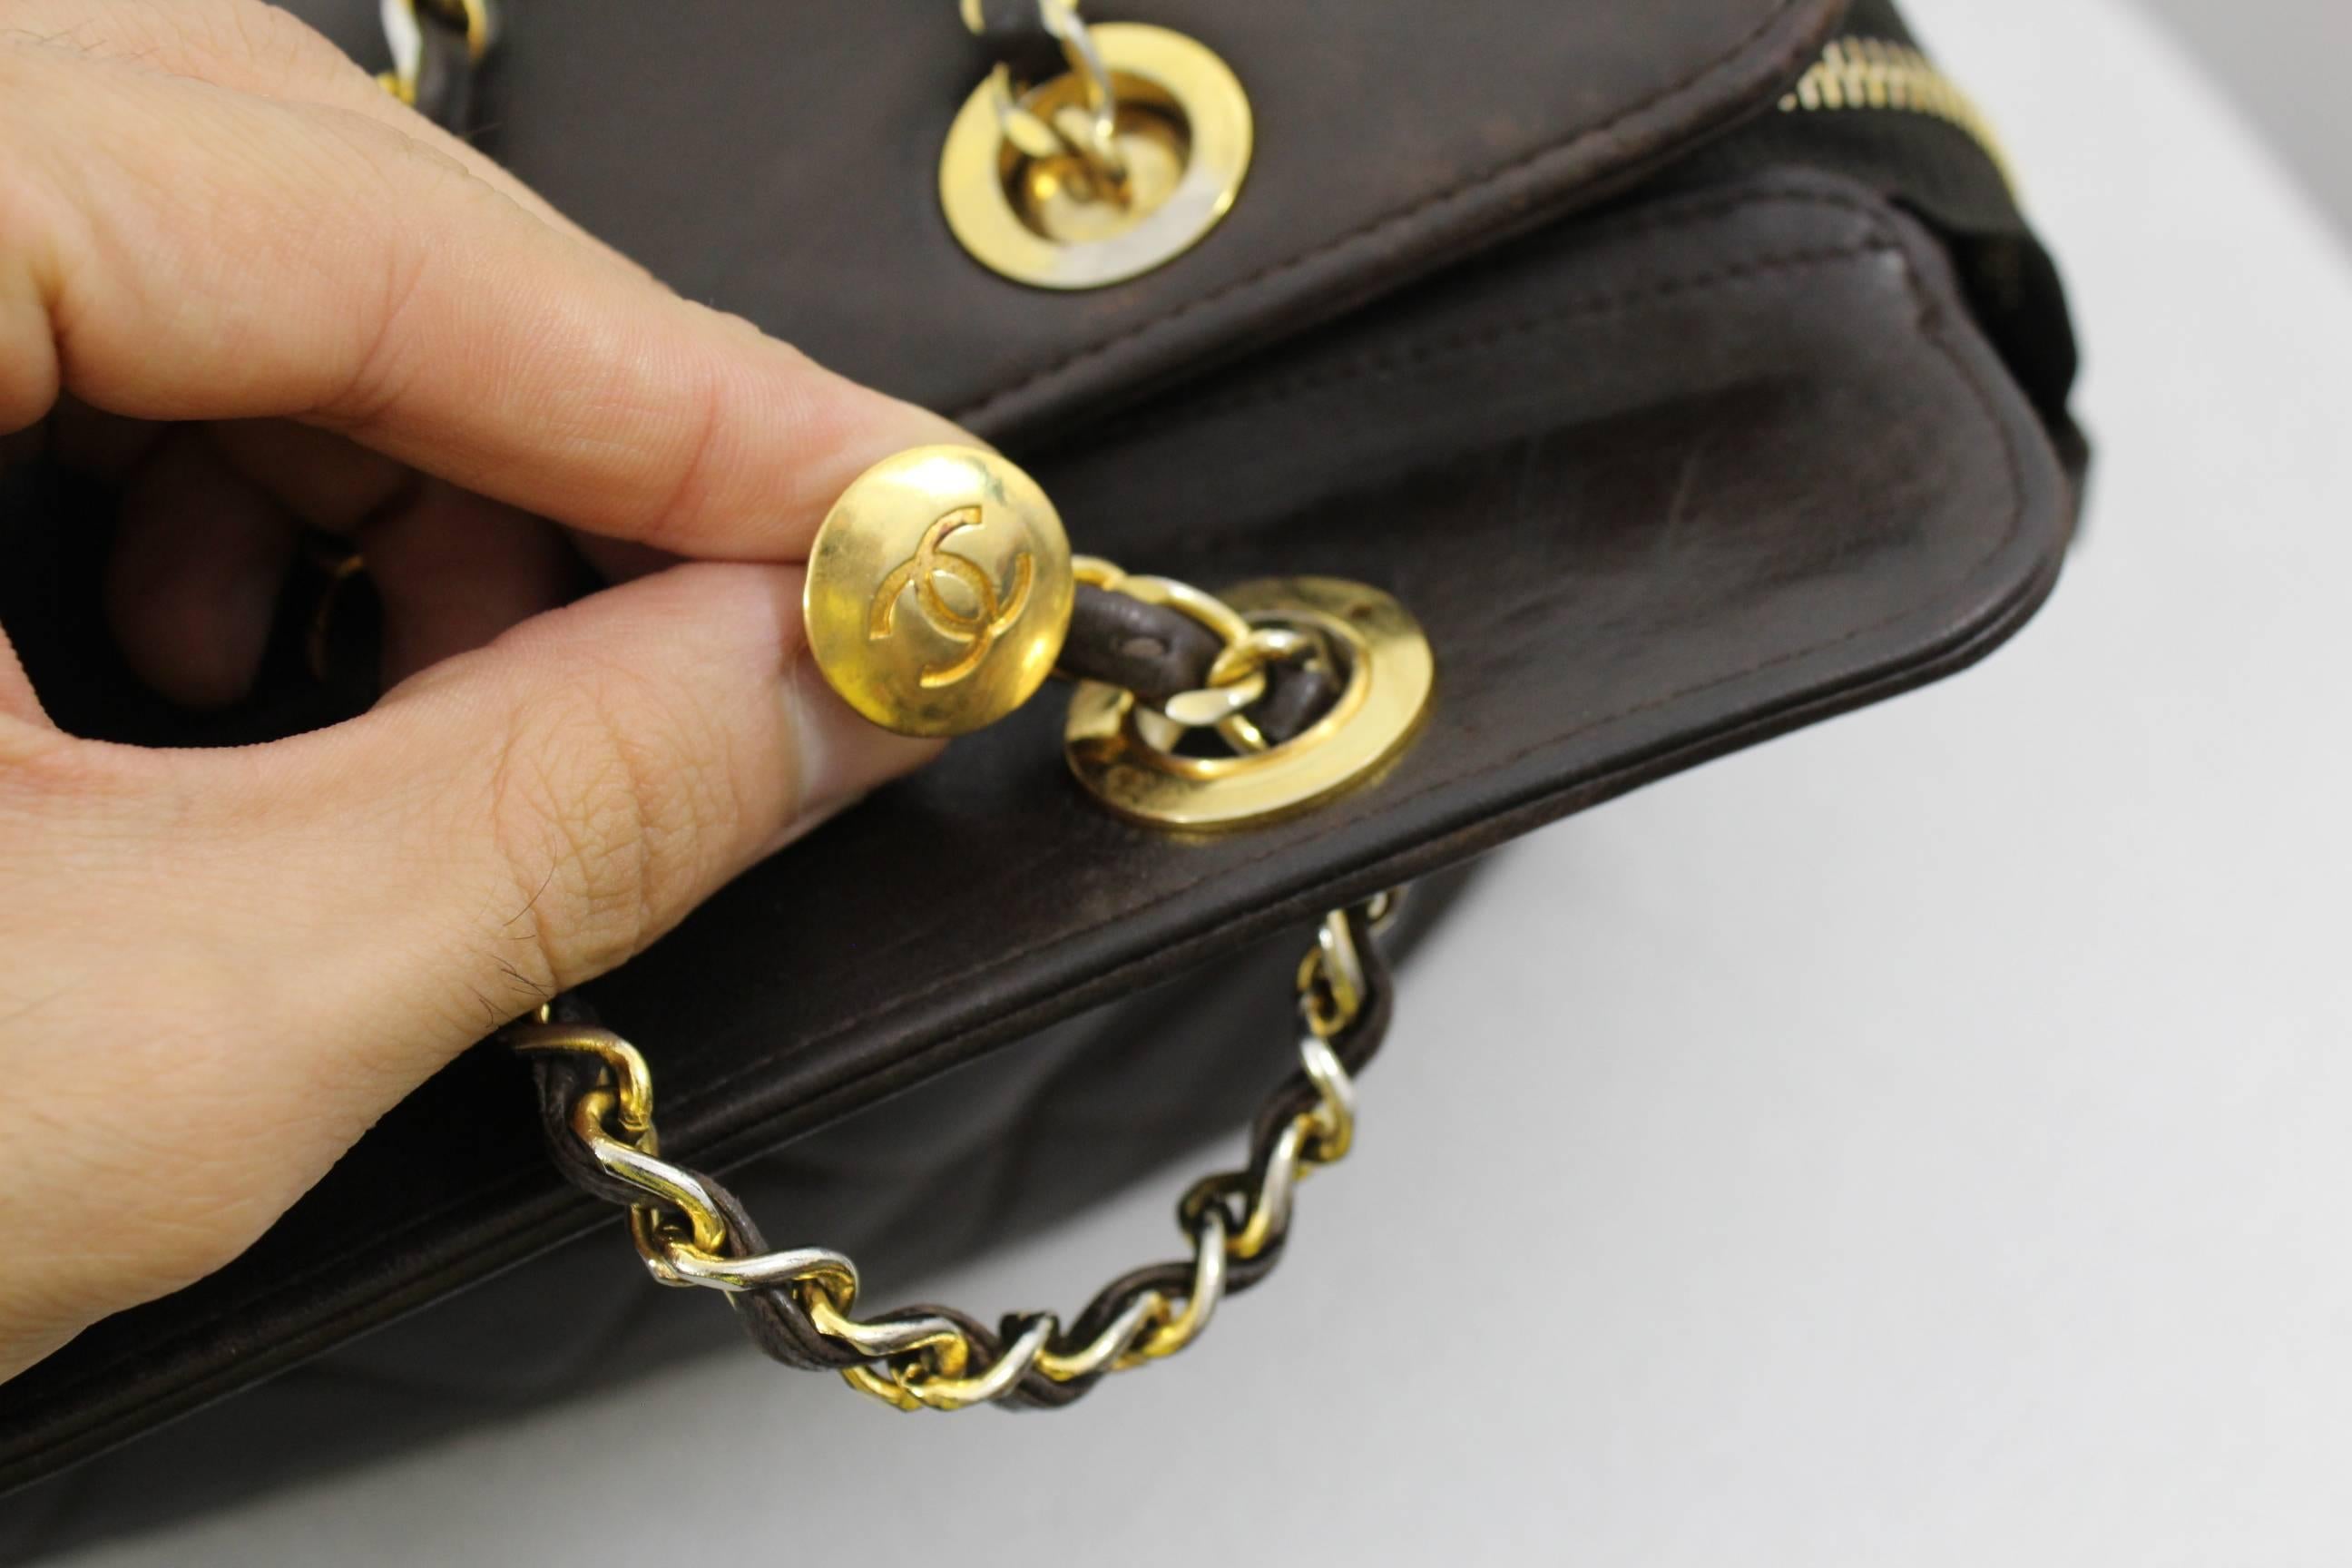 For sale a really nice Vintage Chanel bag in brown chocolat leather and beige leather interior.

vintage bag with signs of wear in the leather in corners ( scuffs) and inside

Some of the gold plated has been lost but remains still really